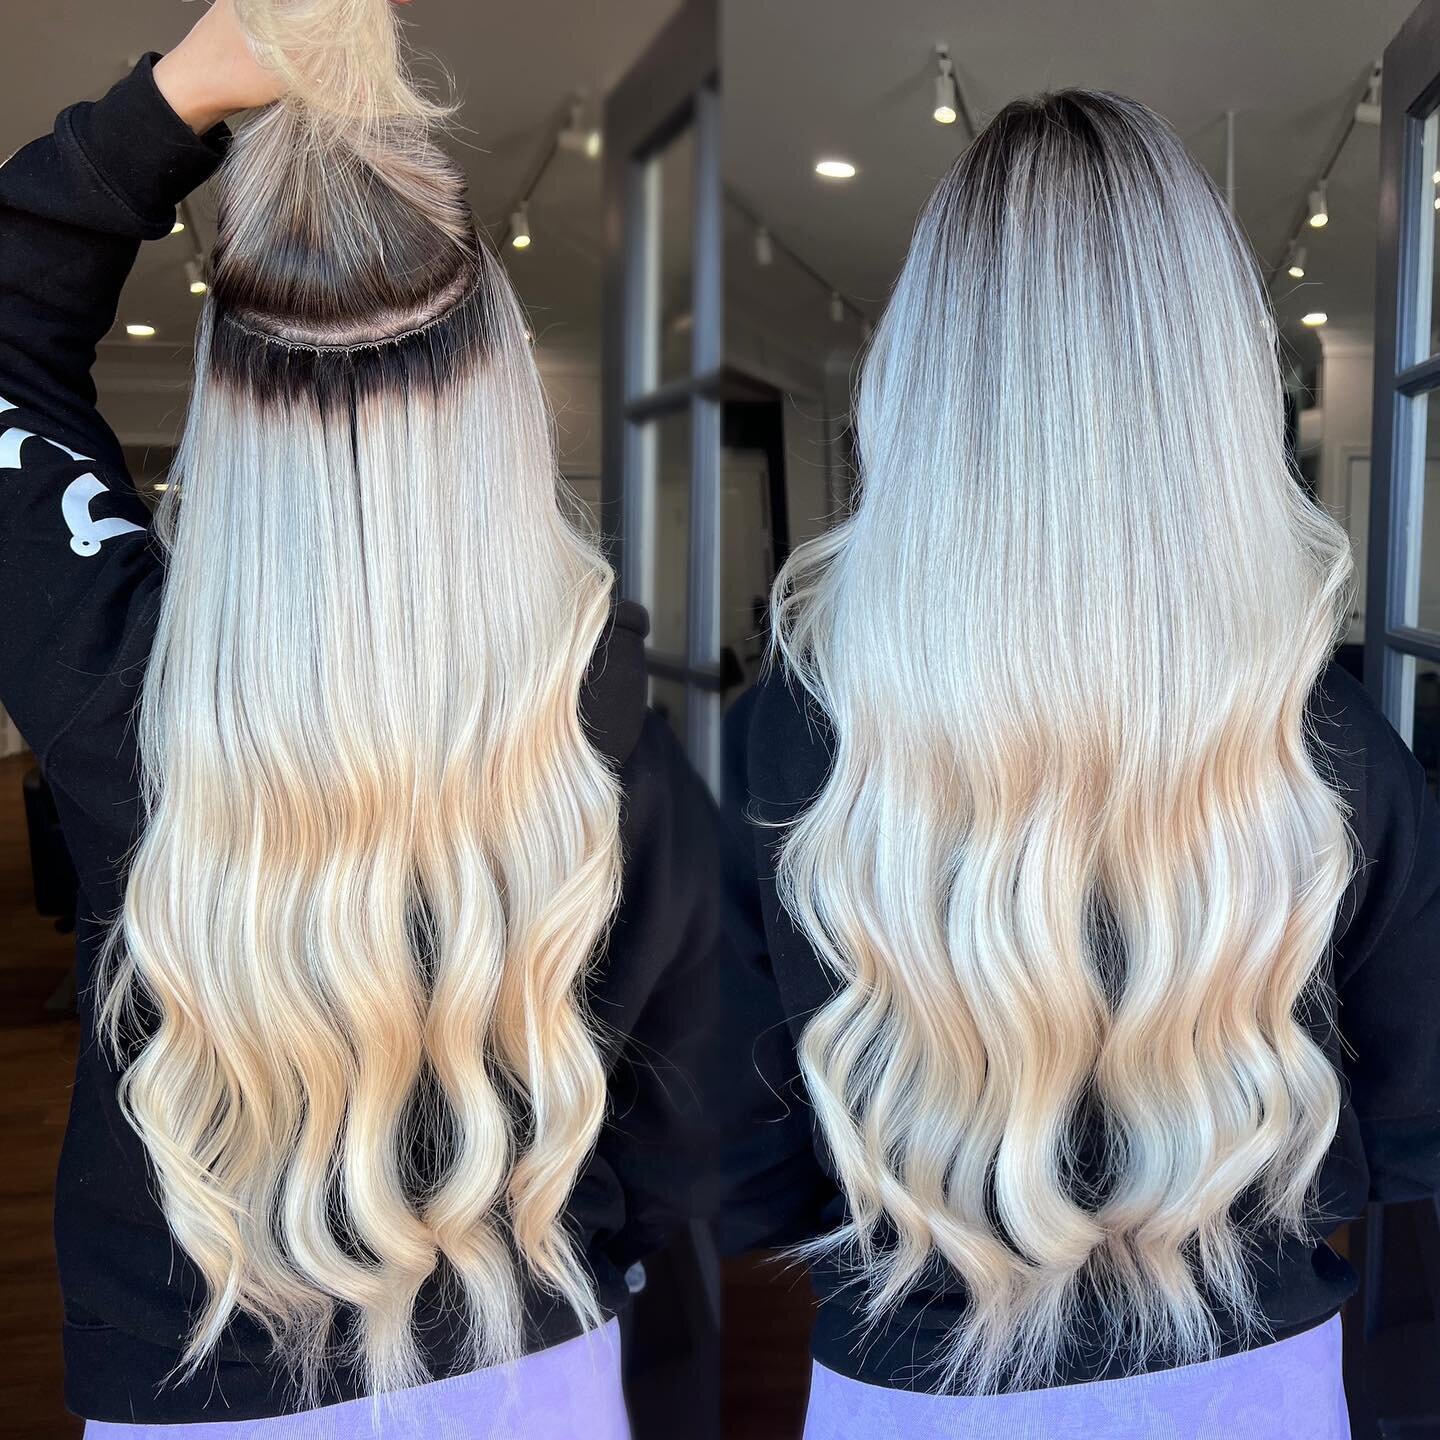 ✨No one would know ✨
-
Weft install and color by Bre @hairbybrec 
-
TEXT TO BOOK 302-379-7876
-

#teasesalonde #delawarehairstylist #delawarehairextensions #bellamihair #bellamipro #volumeweft #handtiedextensions #bellamihairpro #bellamihairextension